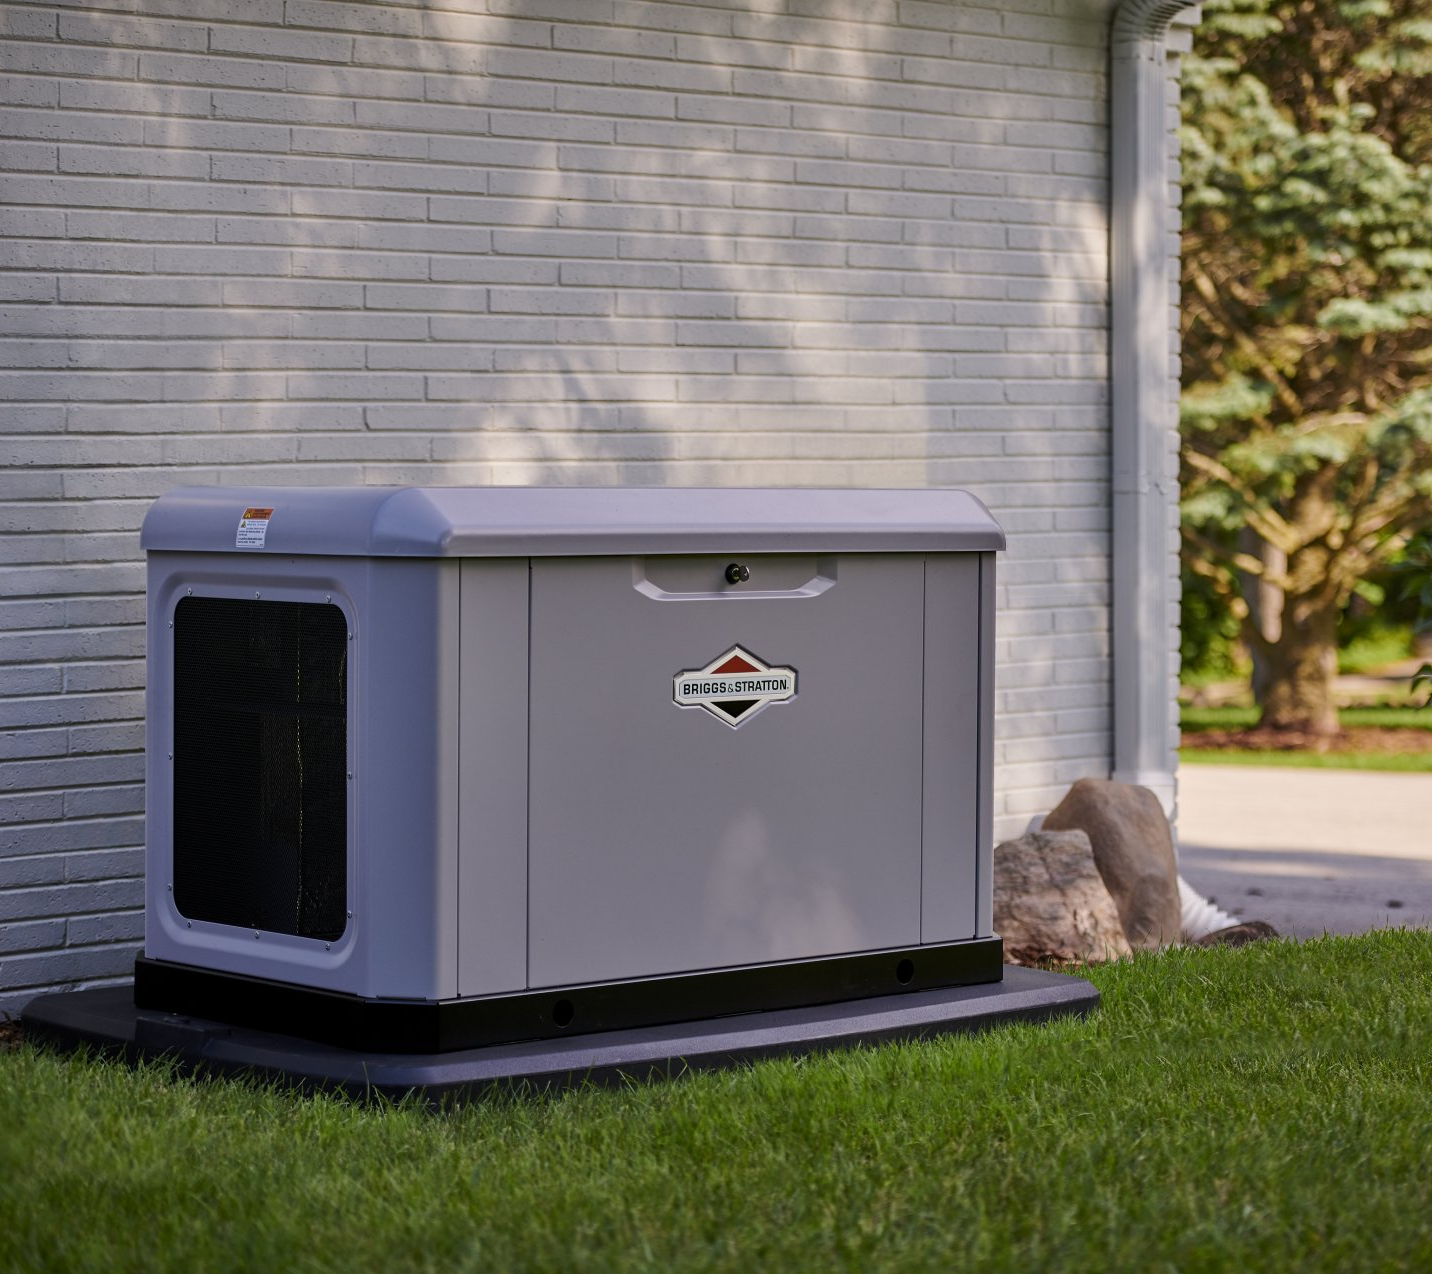 A Big Briggs & Stratton Generator Can Be Installed Outside Your GA Home With GenSpring Power!